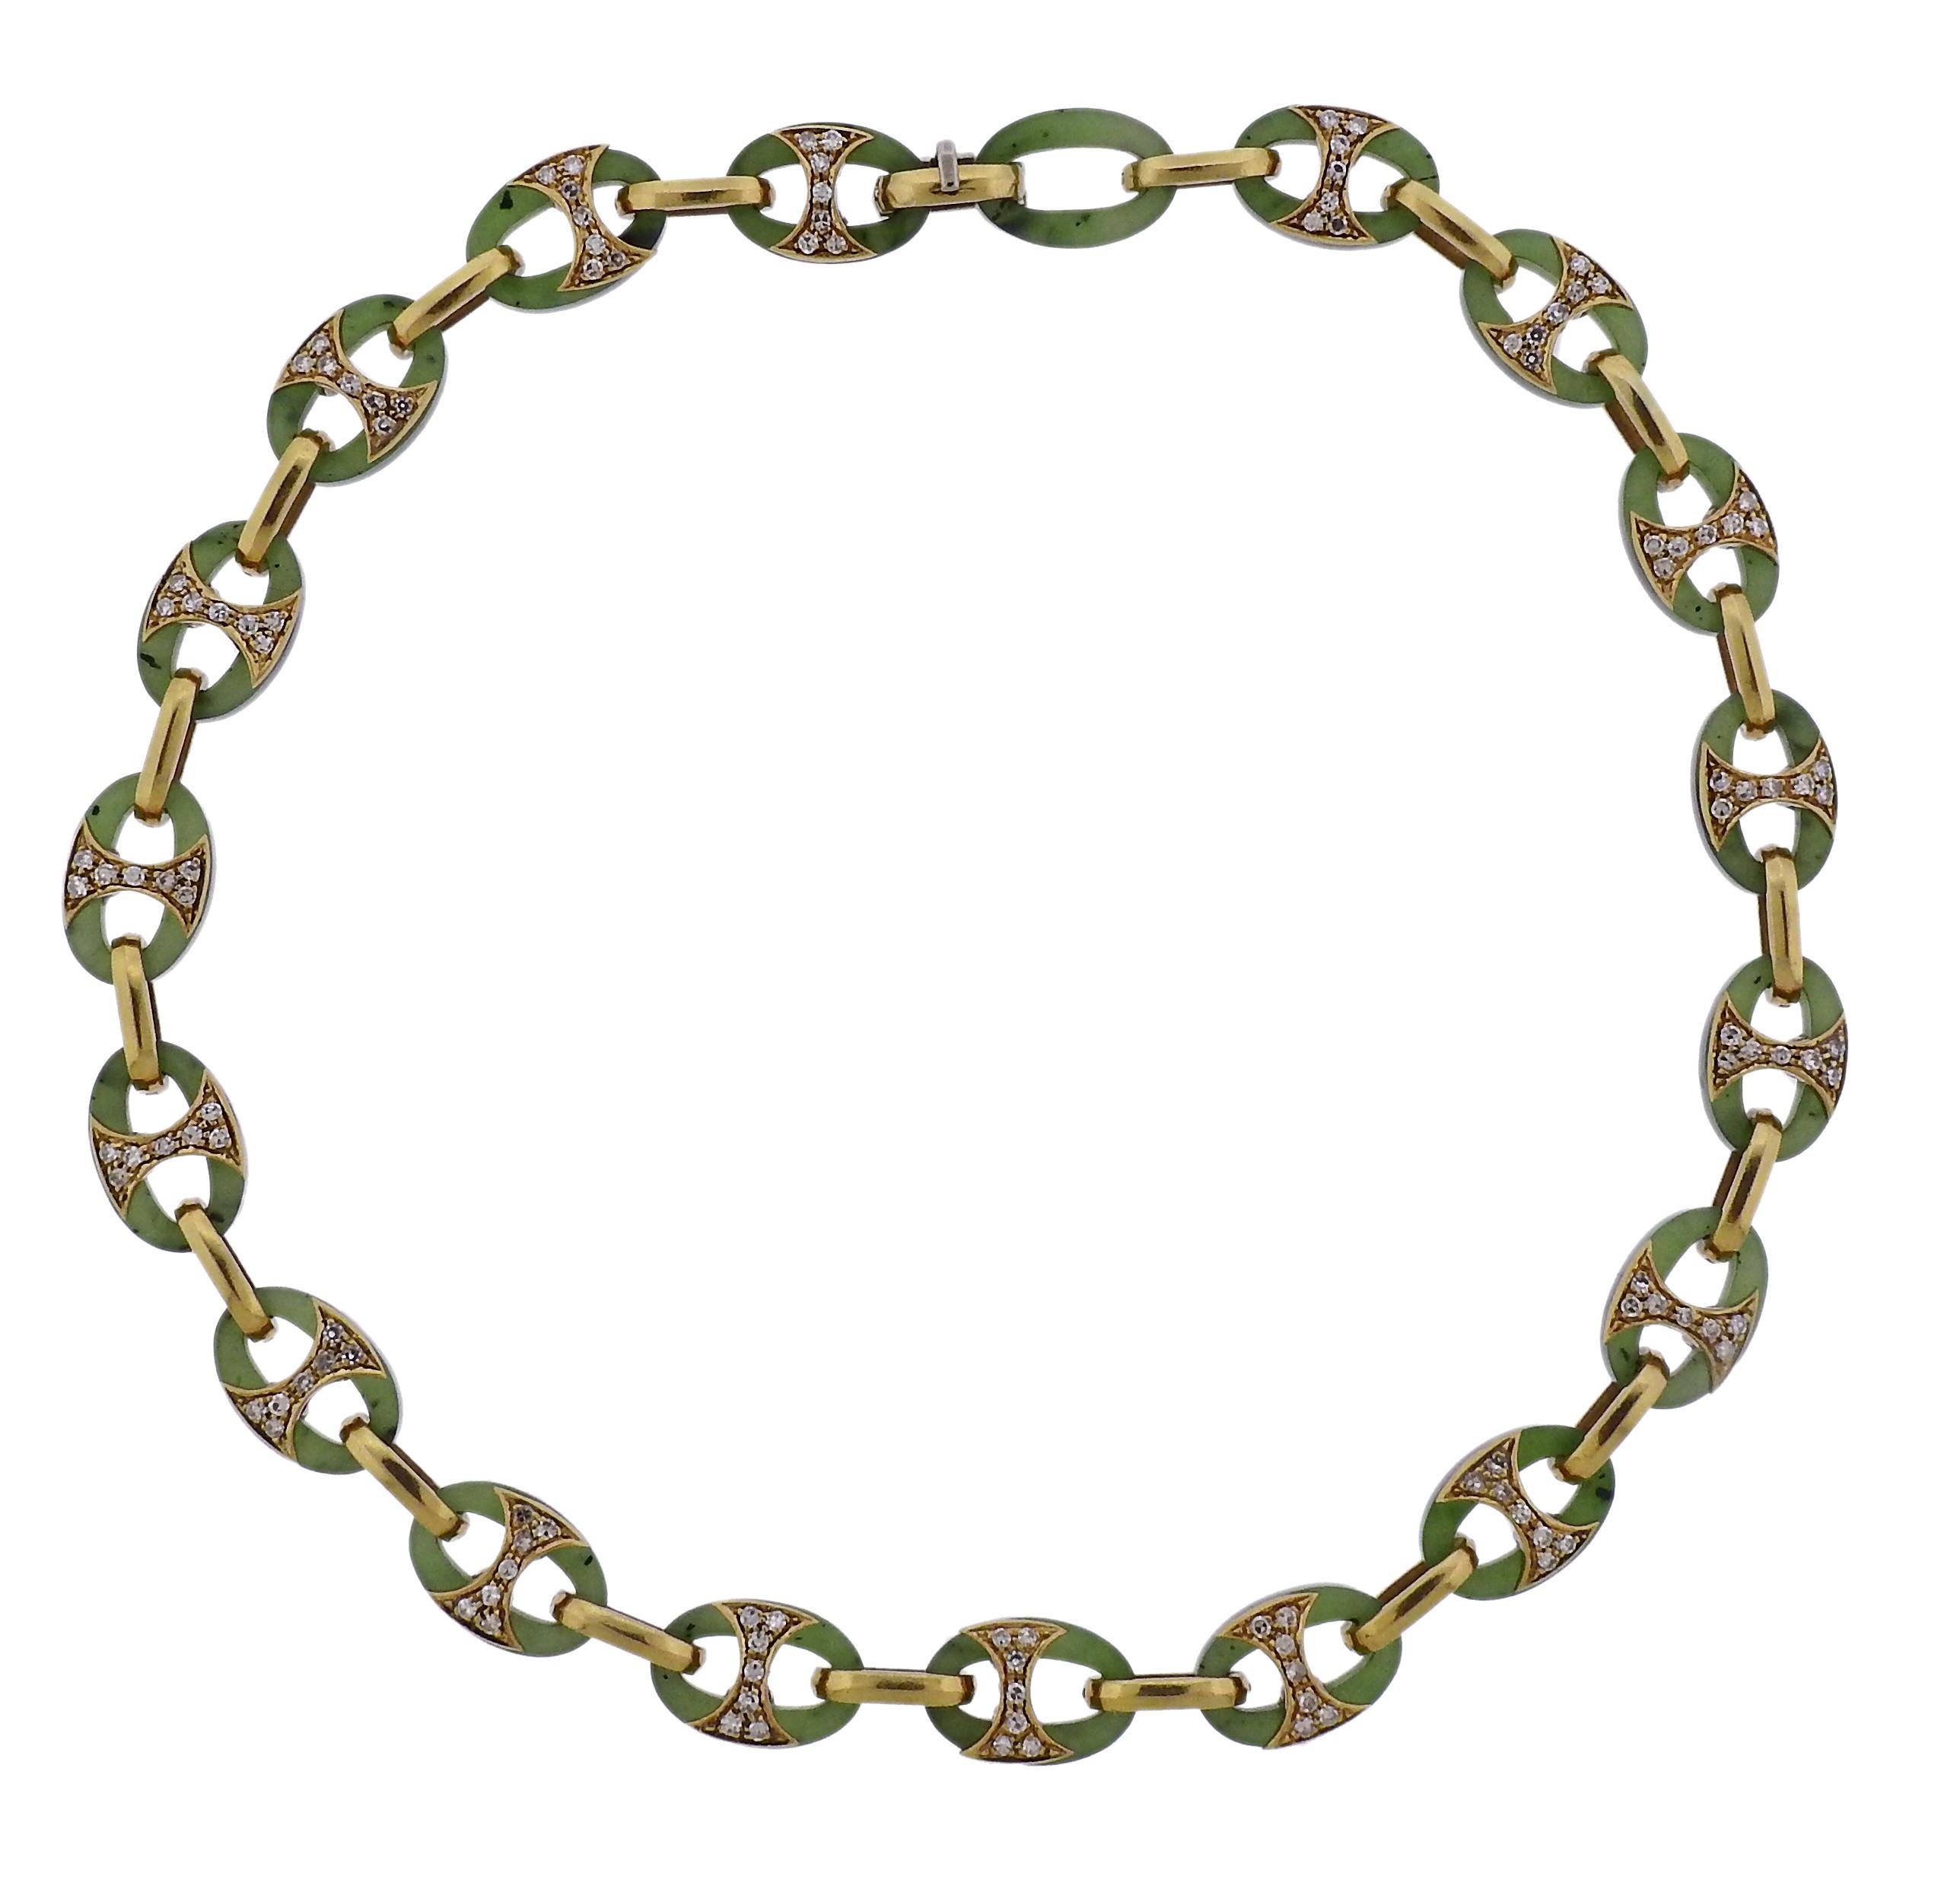 Vintage circa 1980s 18k gold link necklace and bracelet suite,  decorated with nephrite and approx. 1.90ctw in SI1/H diamonds. Necklace is 15.75